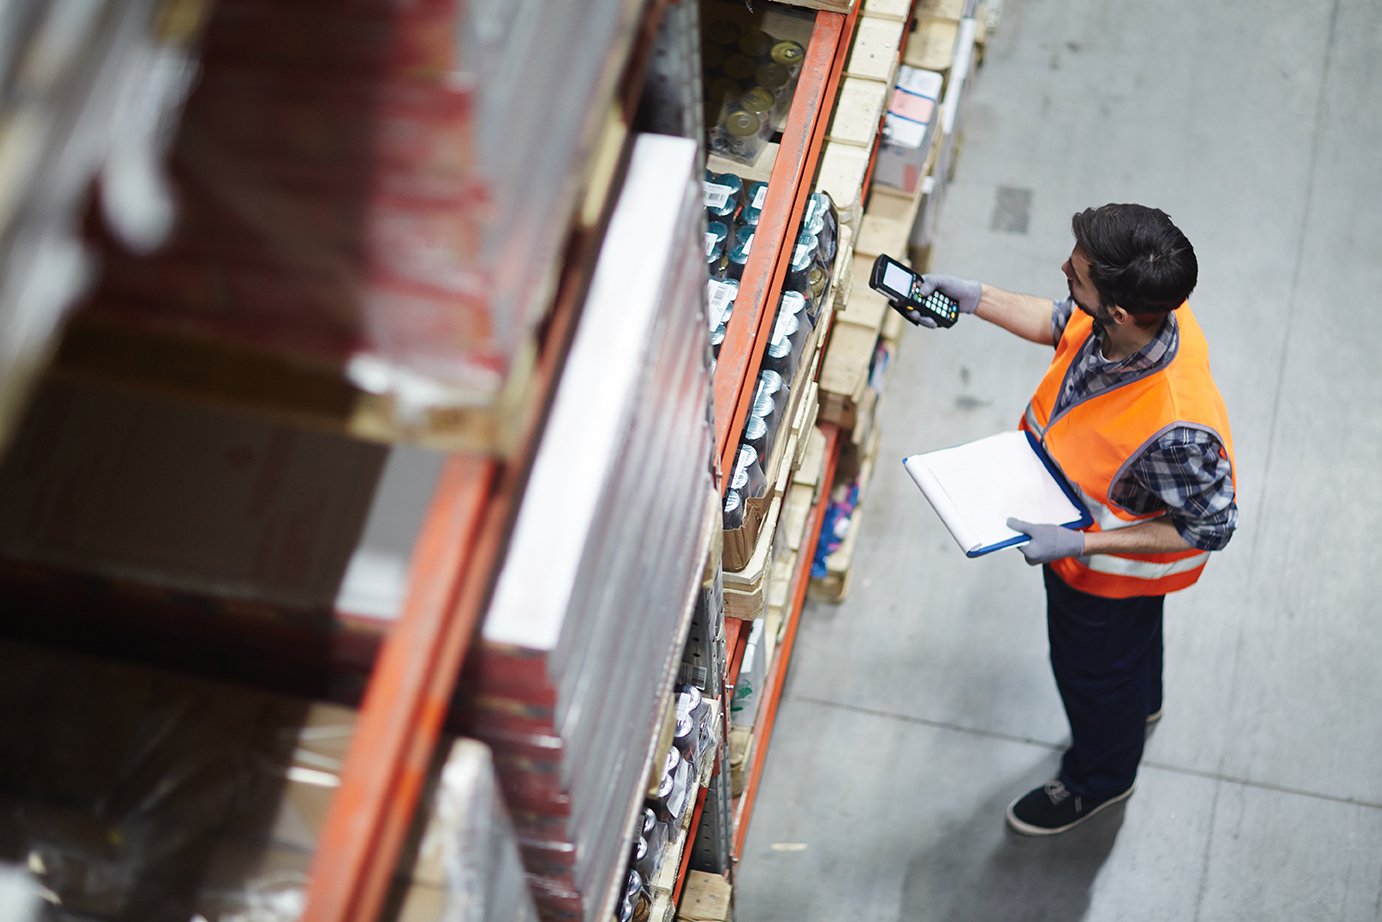 Warehouse worker conducting an inventory audit ahead of contract negotiations